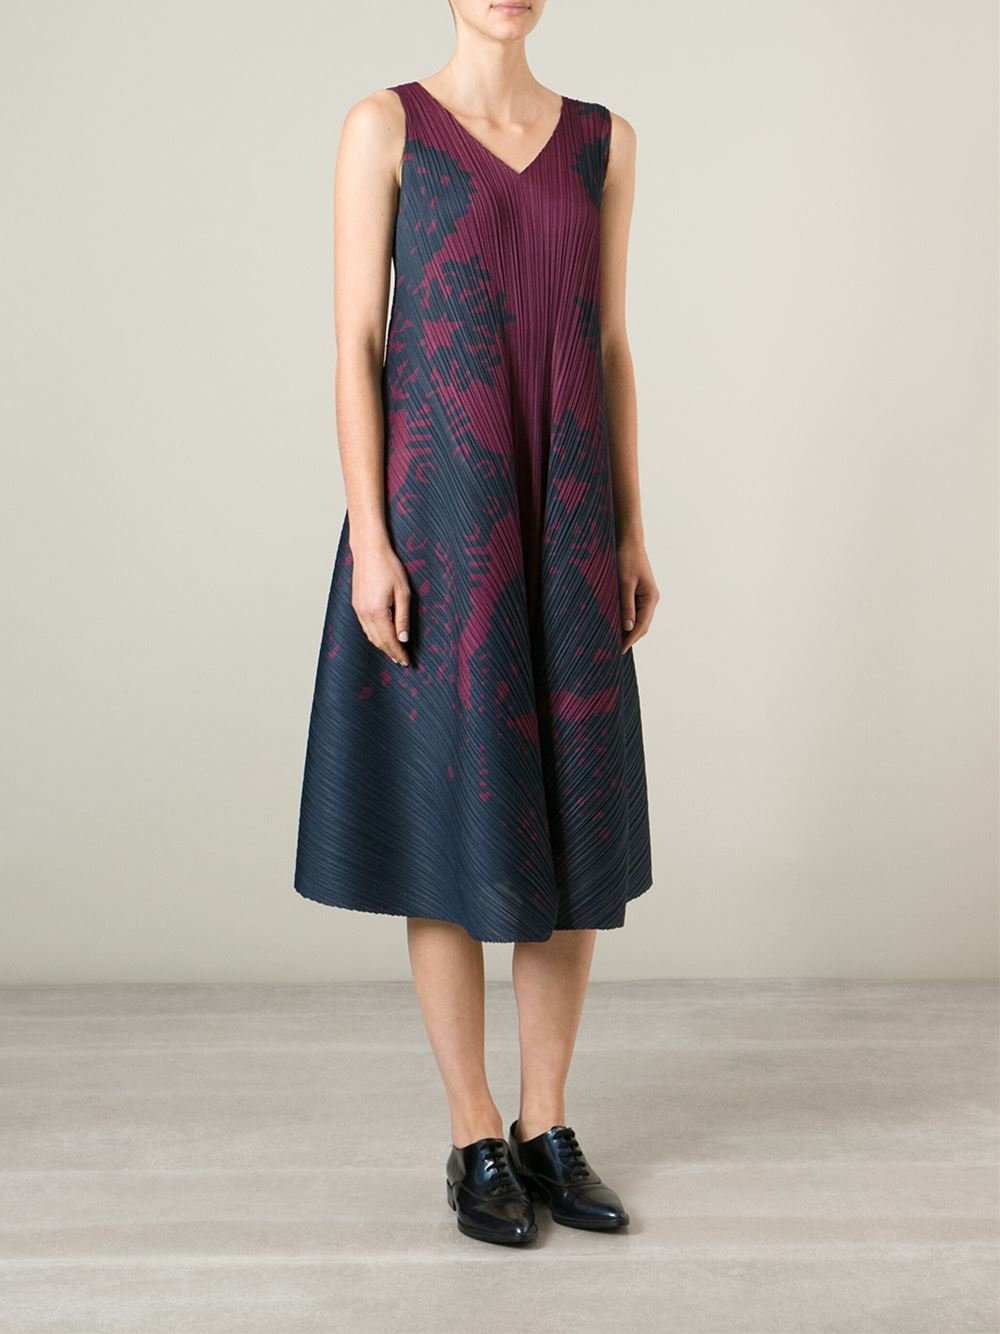 Lyst - Pleats Please Issey Miyake Printed A-Line Dress in Blue